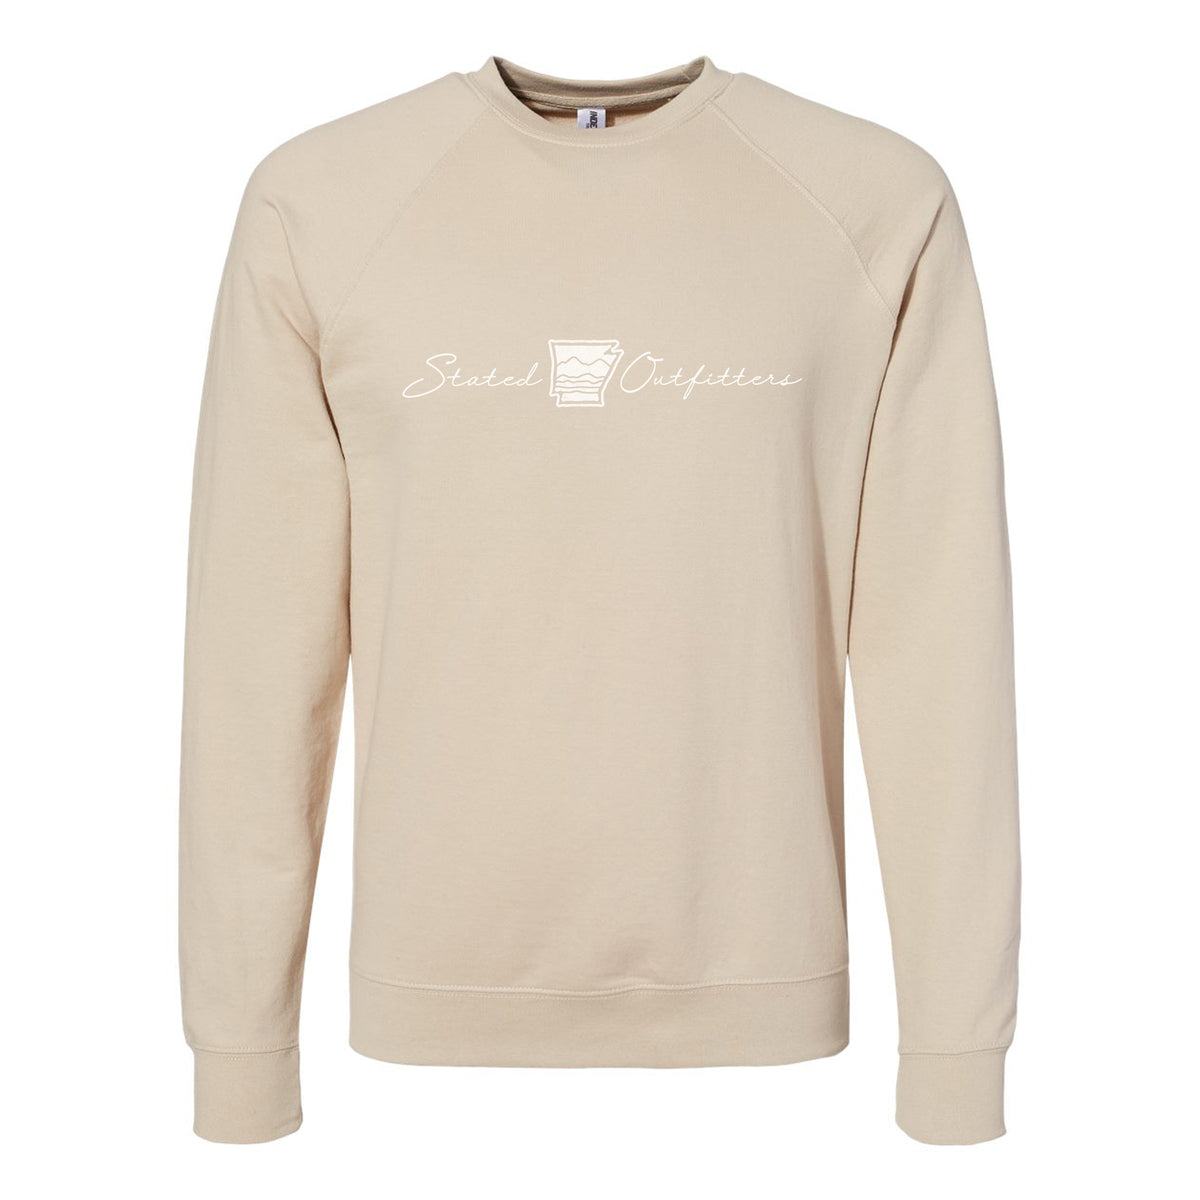 Stated Outfitters Linear Sweatshirt